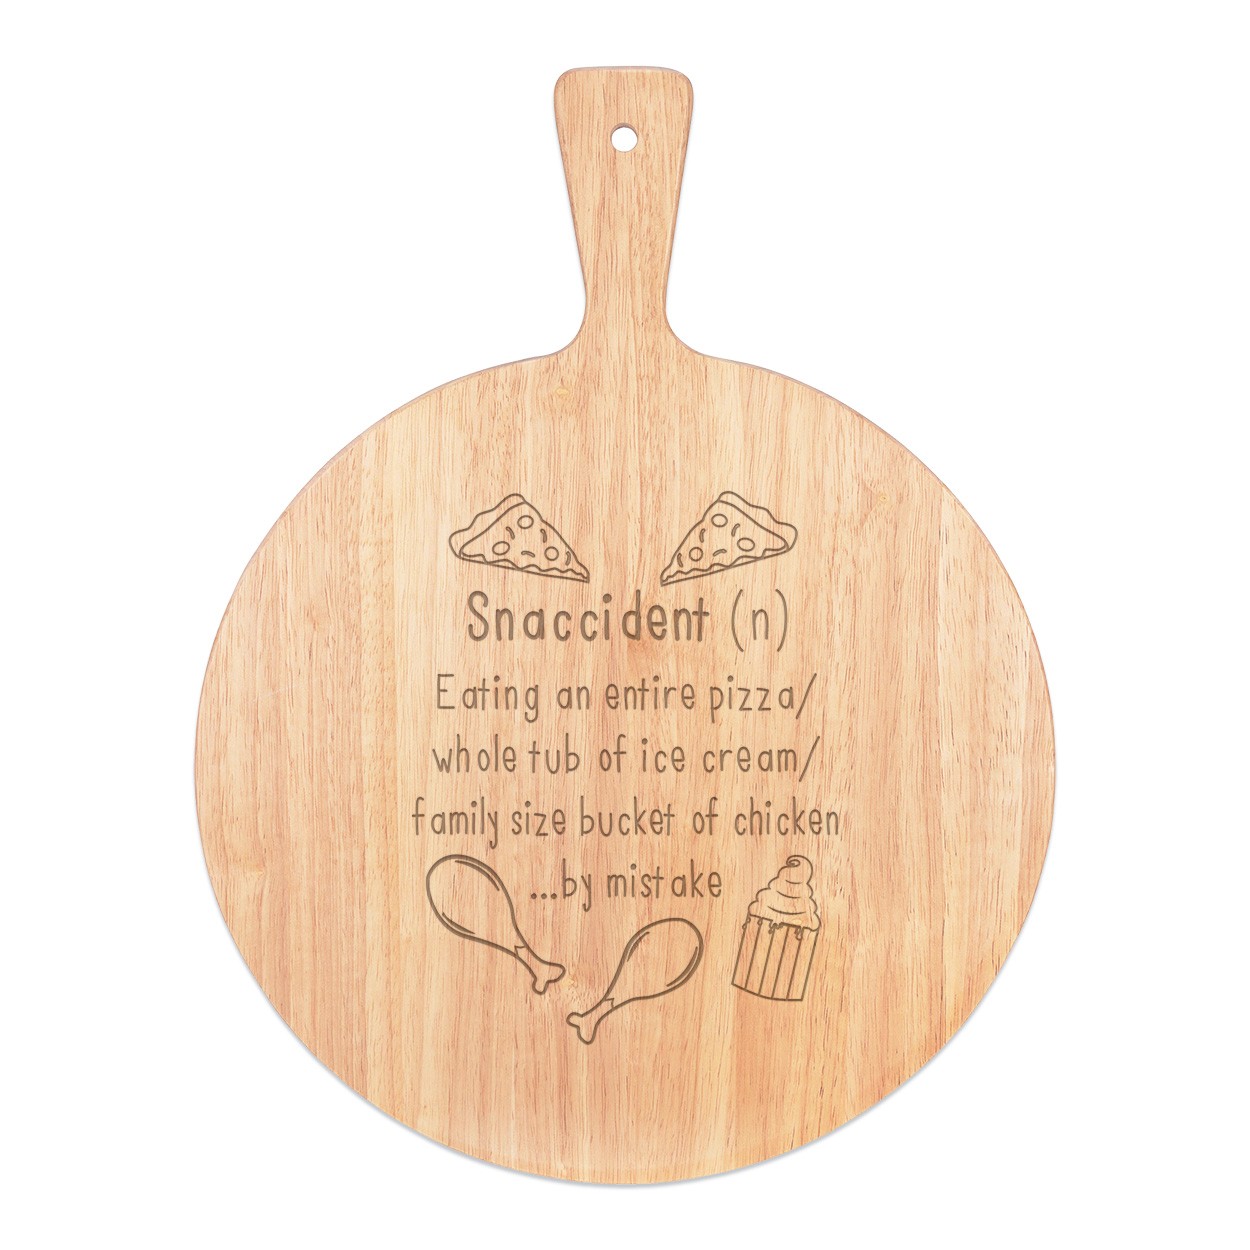 Snaccident Definition Pizza Board Paddle Serving Tray Handle Round Wooden 45x34cm